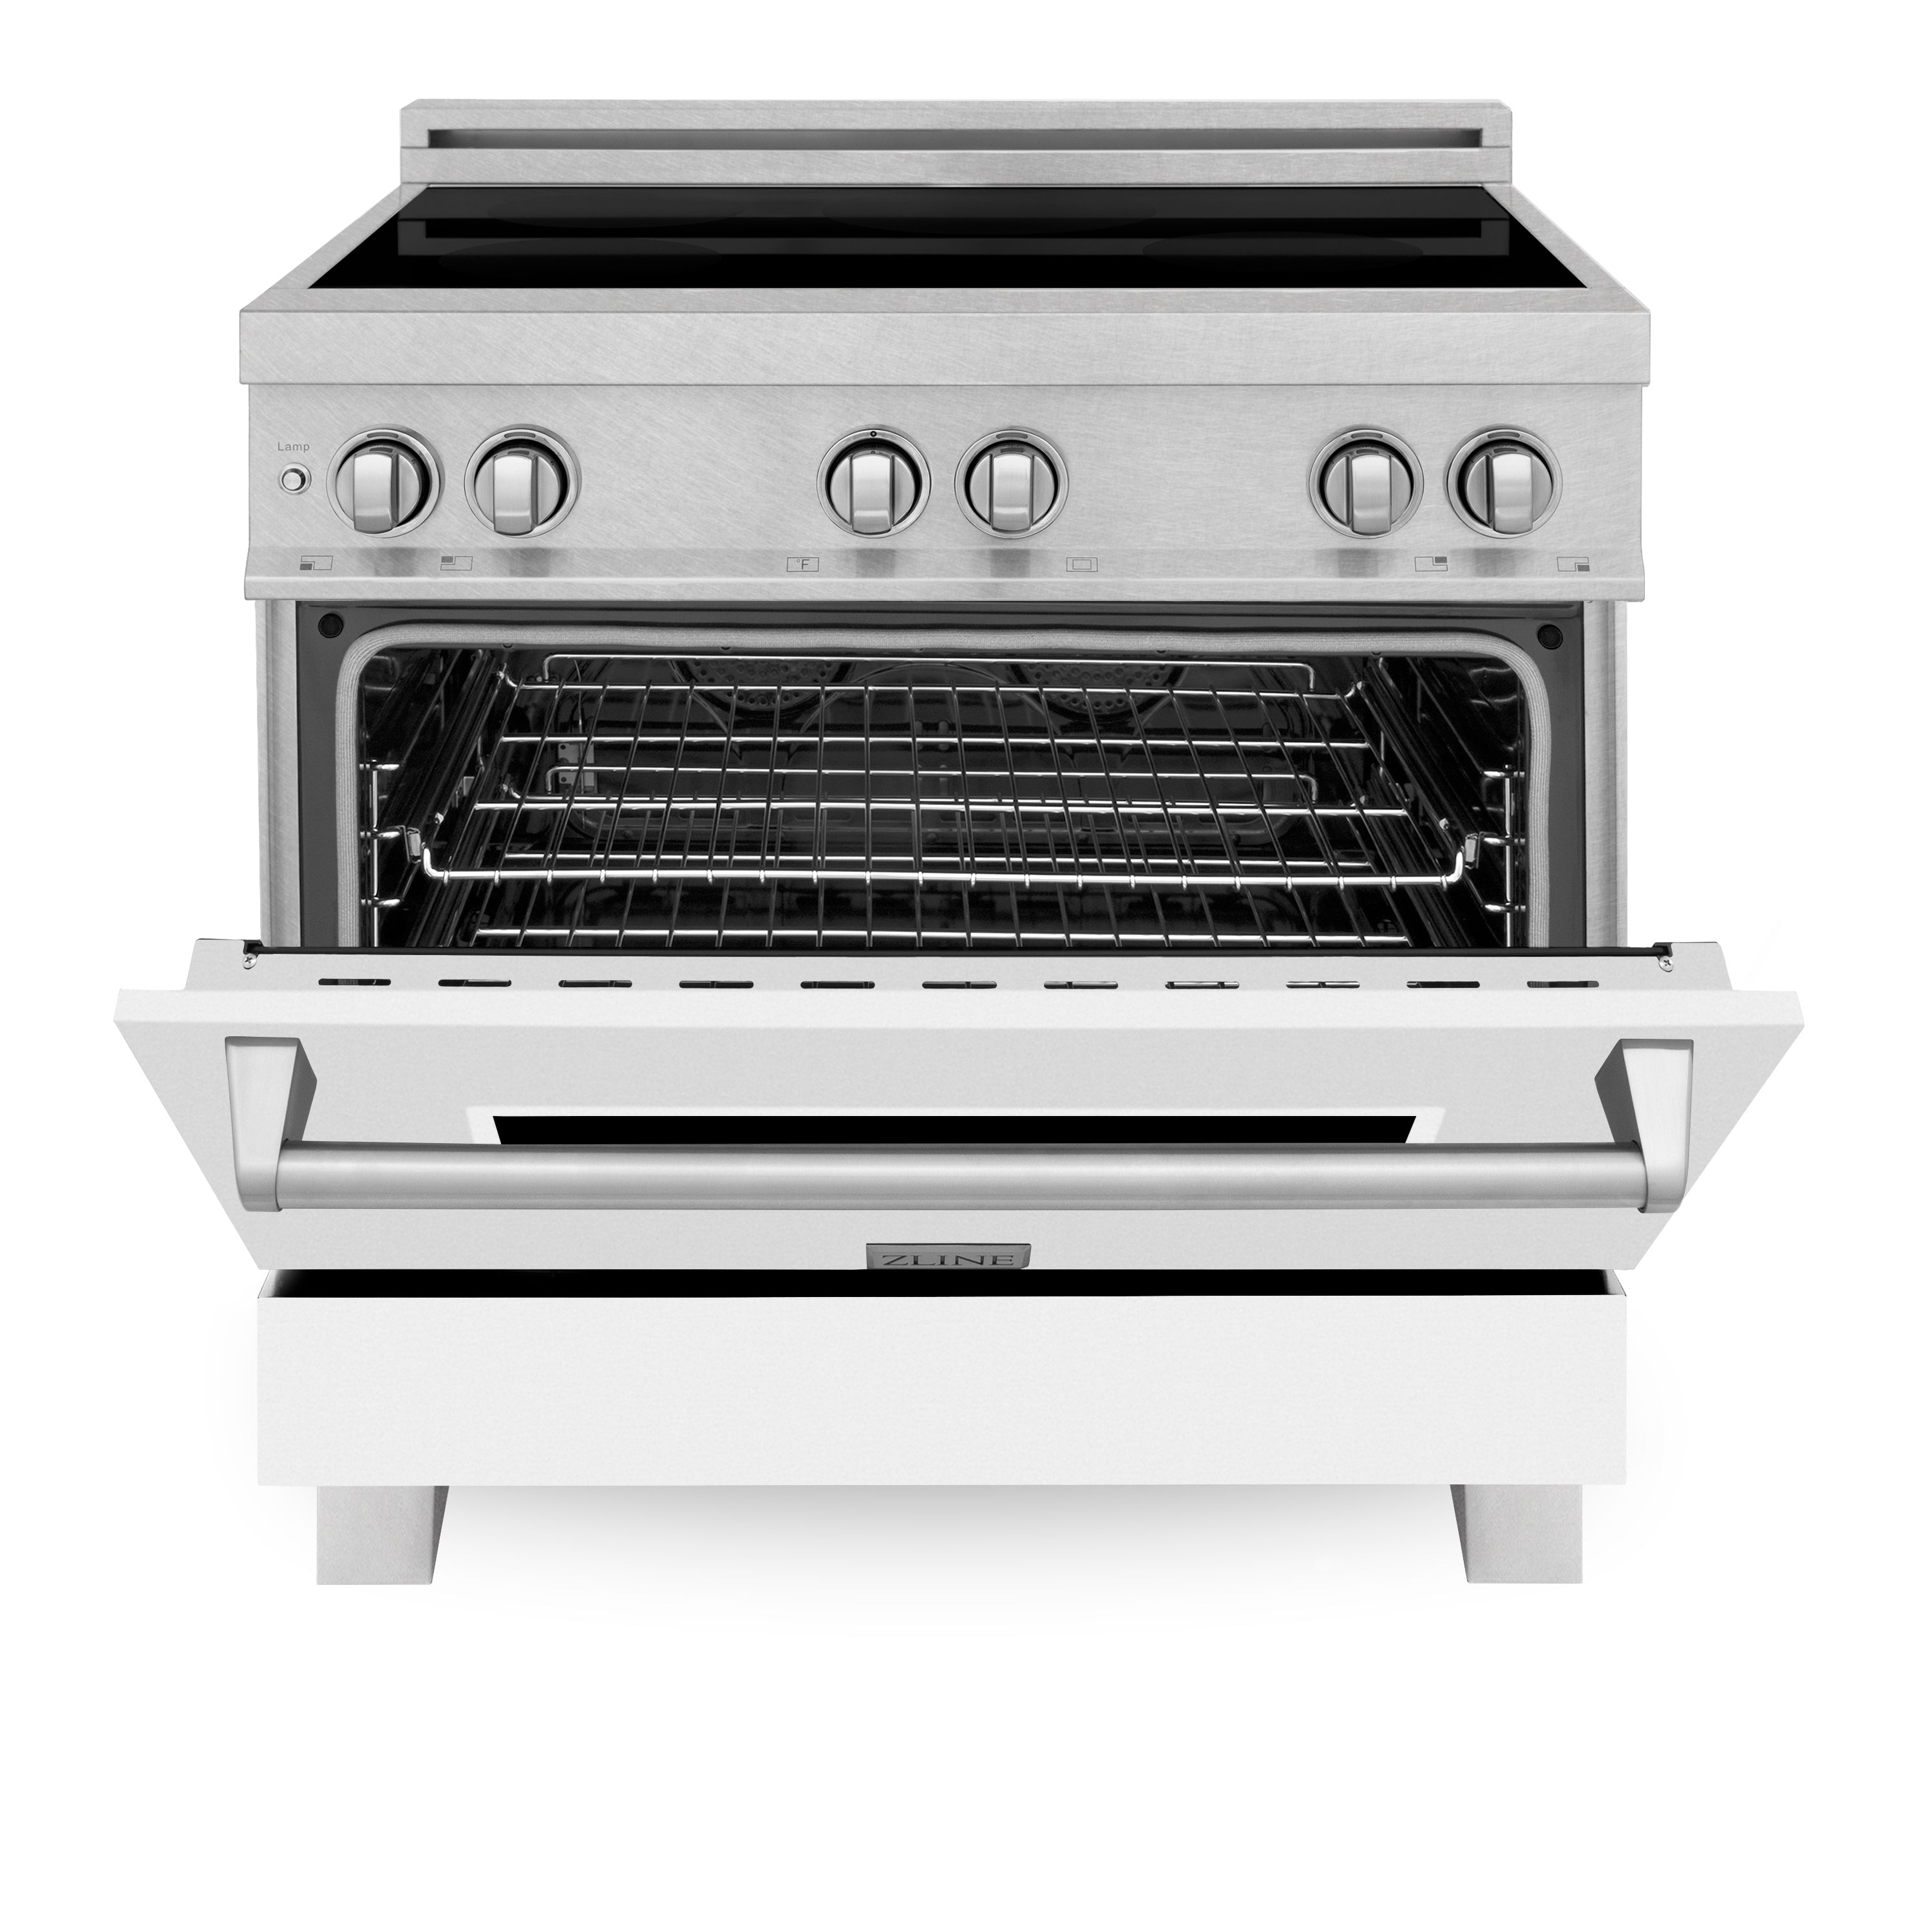 ZLINE 36" 4.6 cu. ft. Induction Range with a 4 Element Stove and Electric Oven in White Matte (RAINDS-WM-36)